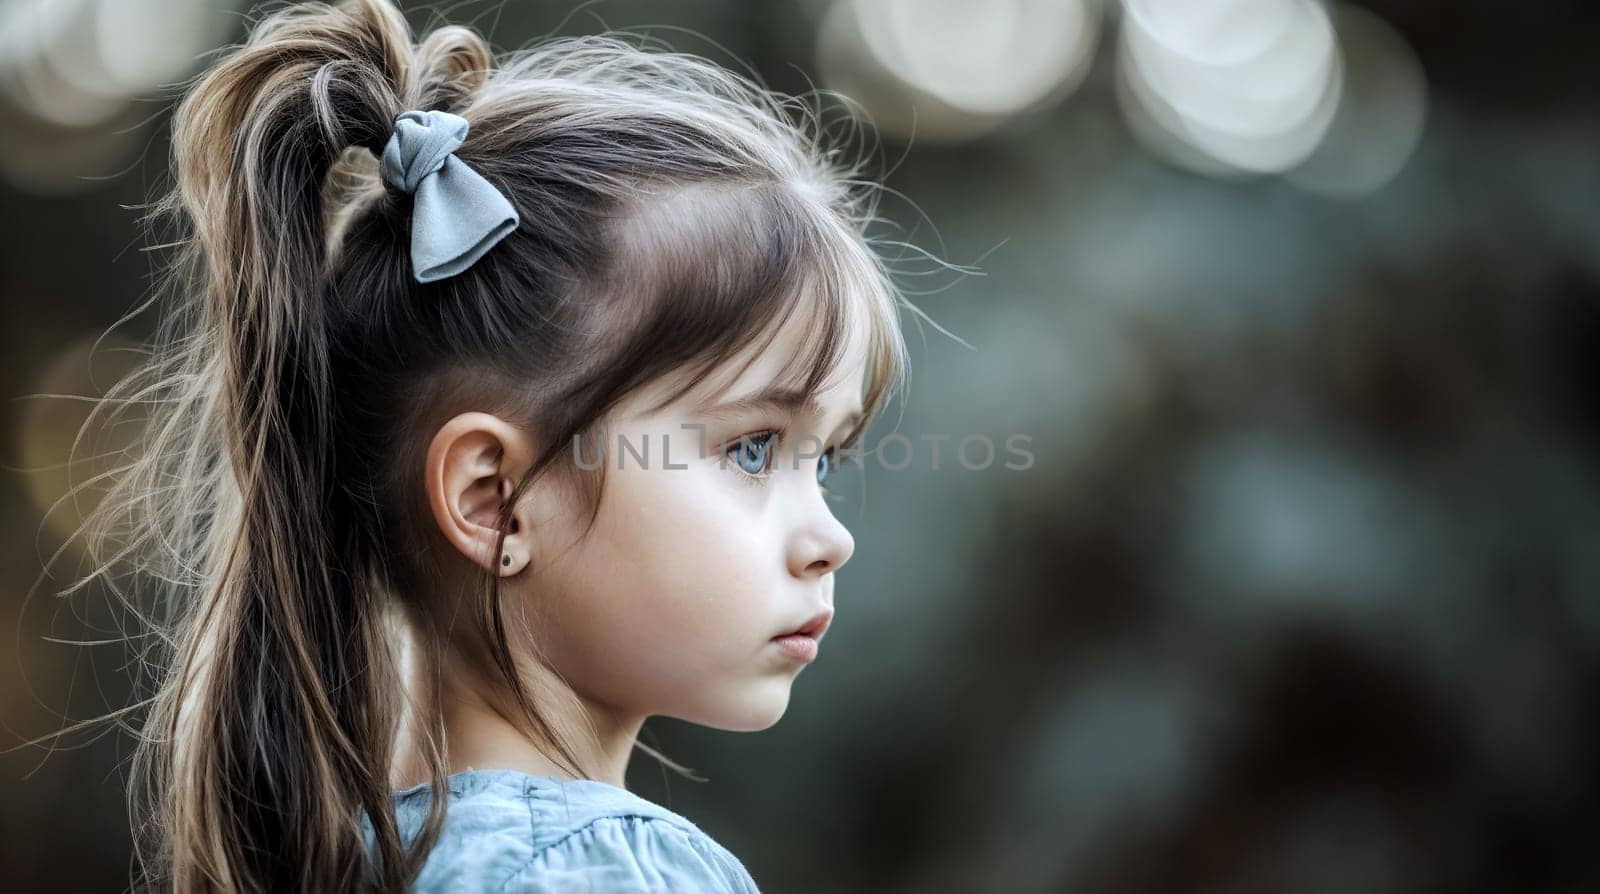 A close-up portrait of a contemplative young girl, her innocence reflected in her deep blue eyes and serene expression by chrisroll